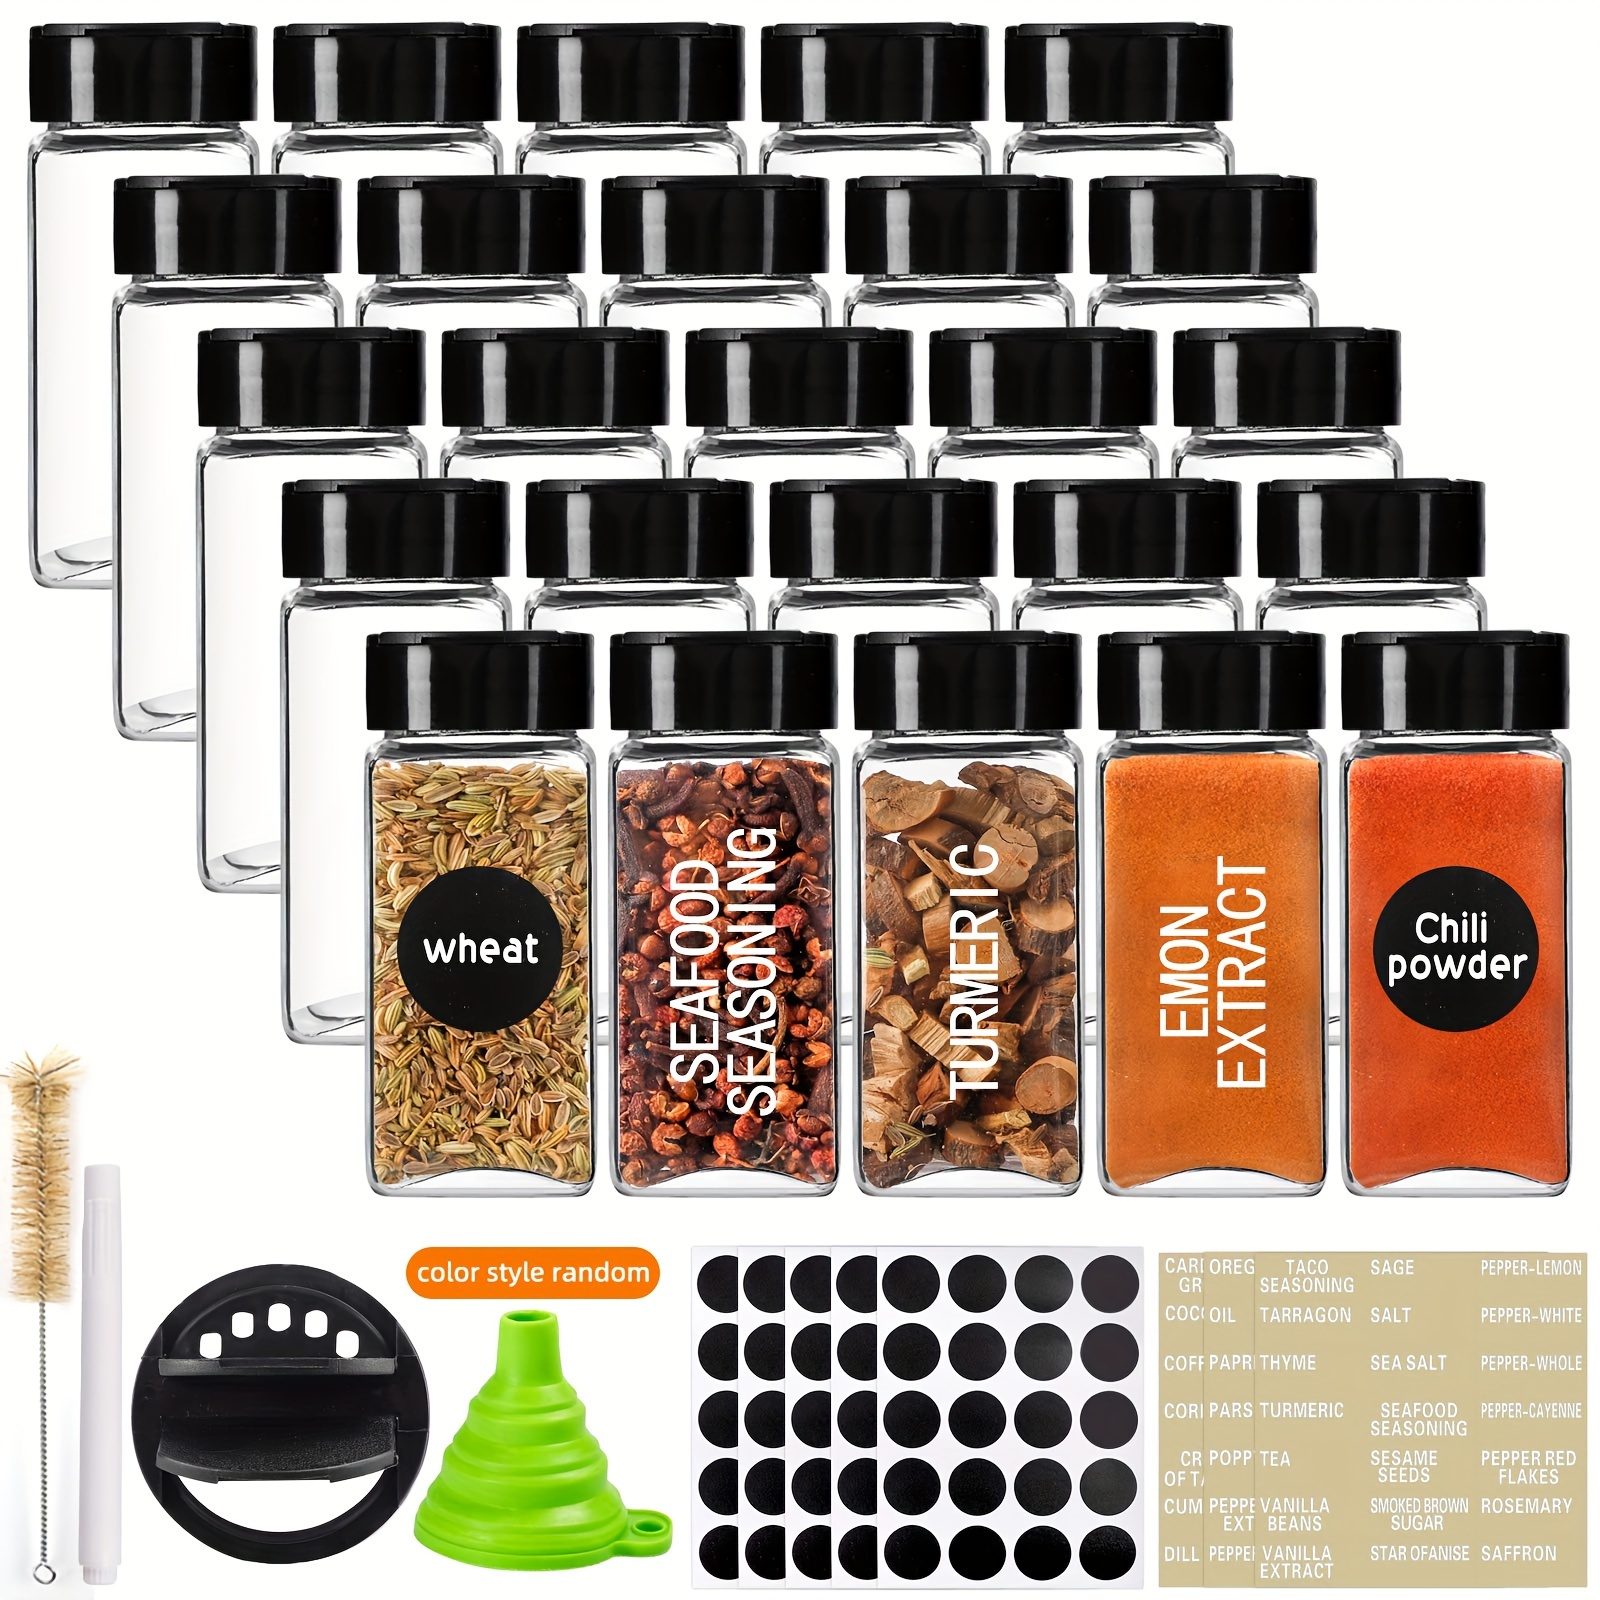 

25 Pcs Glass Spice Jars With Labels, 4oz Square Seasoning Jars With Black Lids For Spice, Silicone Collapsible Funnel, Brush And Chalk Marker Included